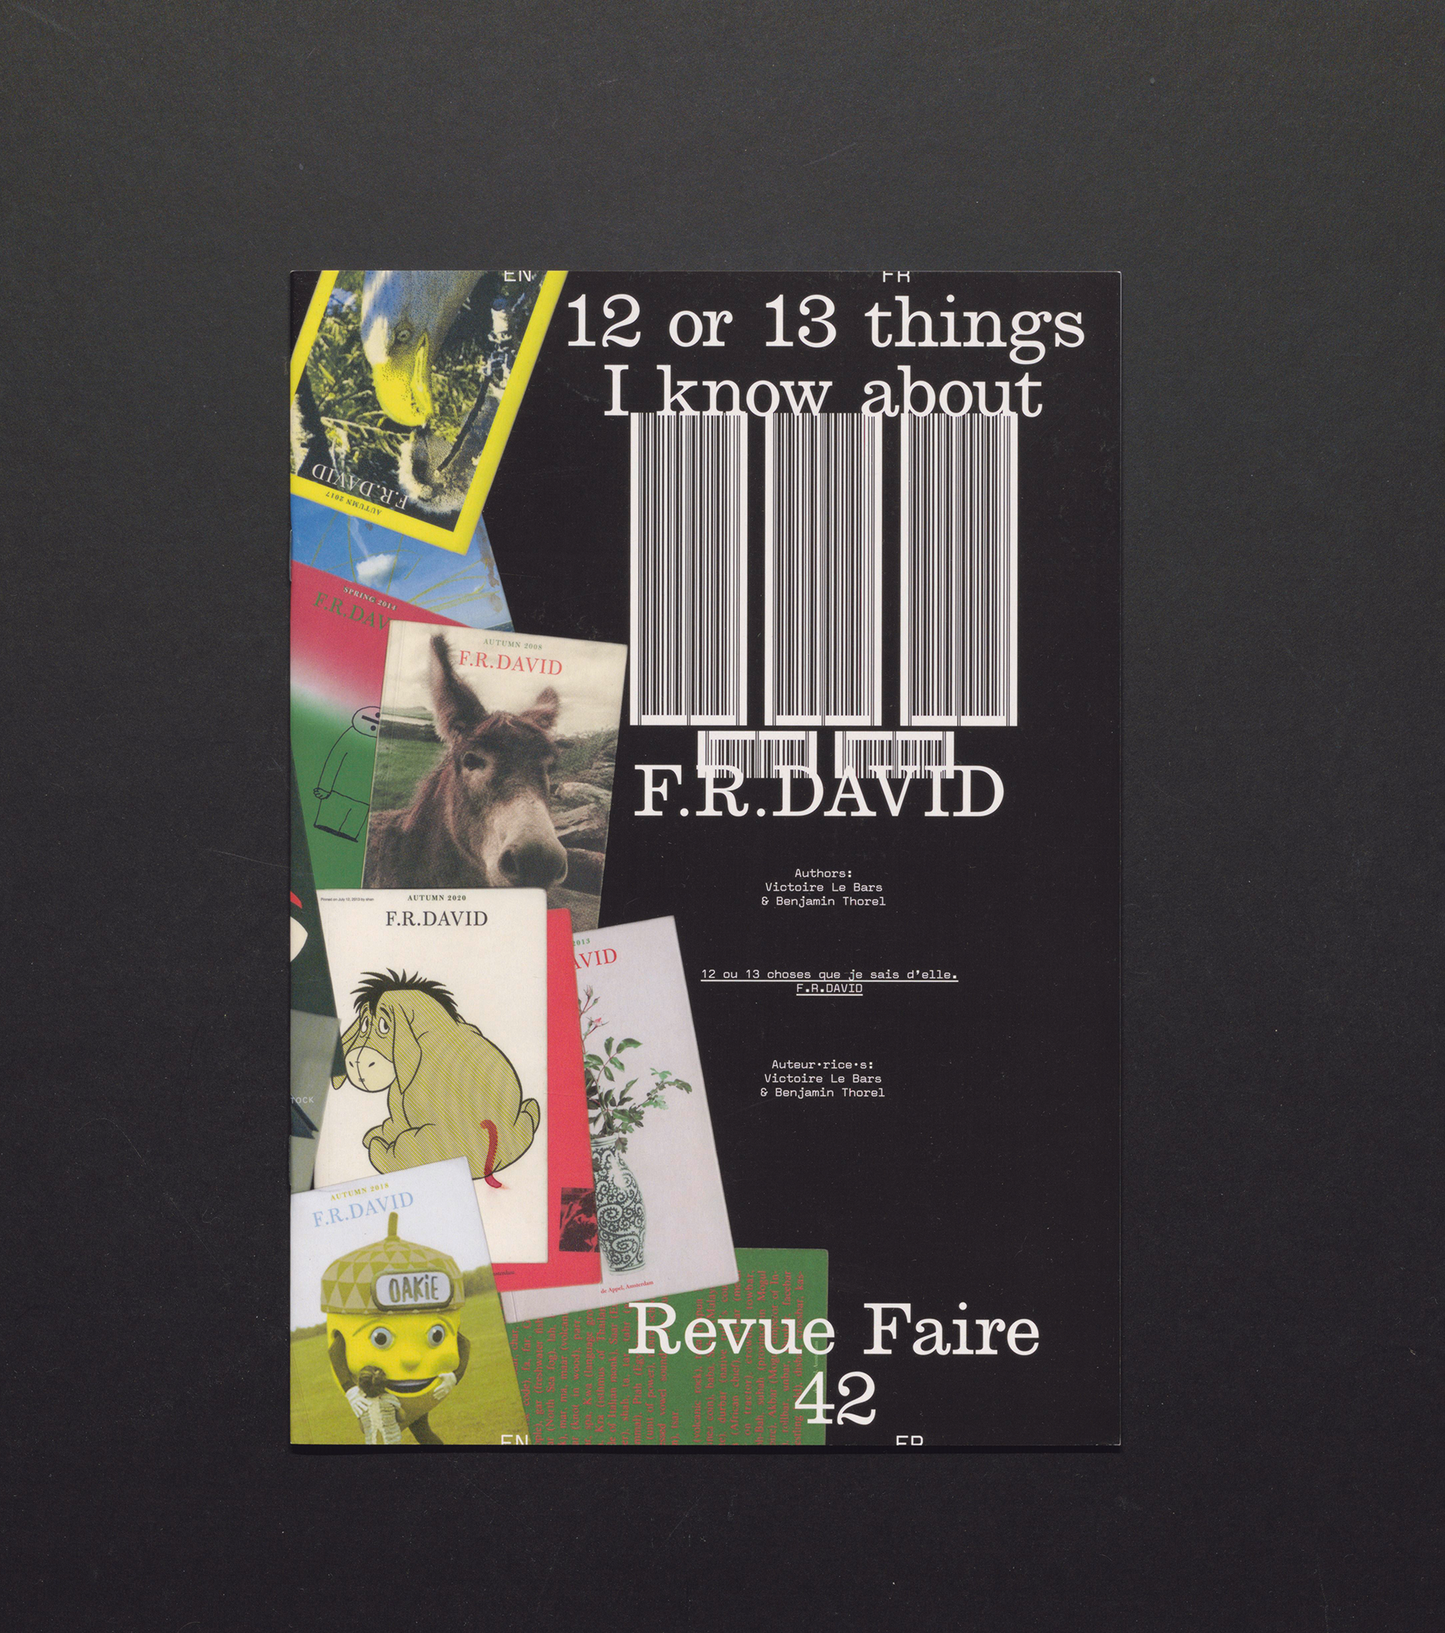 Revue Faire No. 42 - 12 ou 13 things I know about: F.R.DAVID